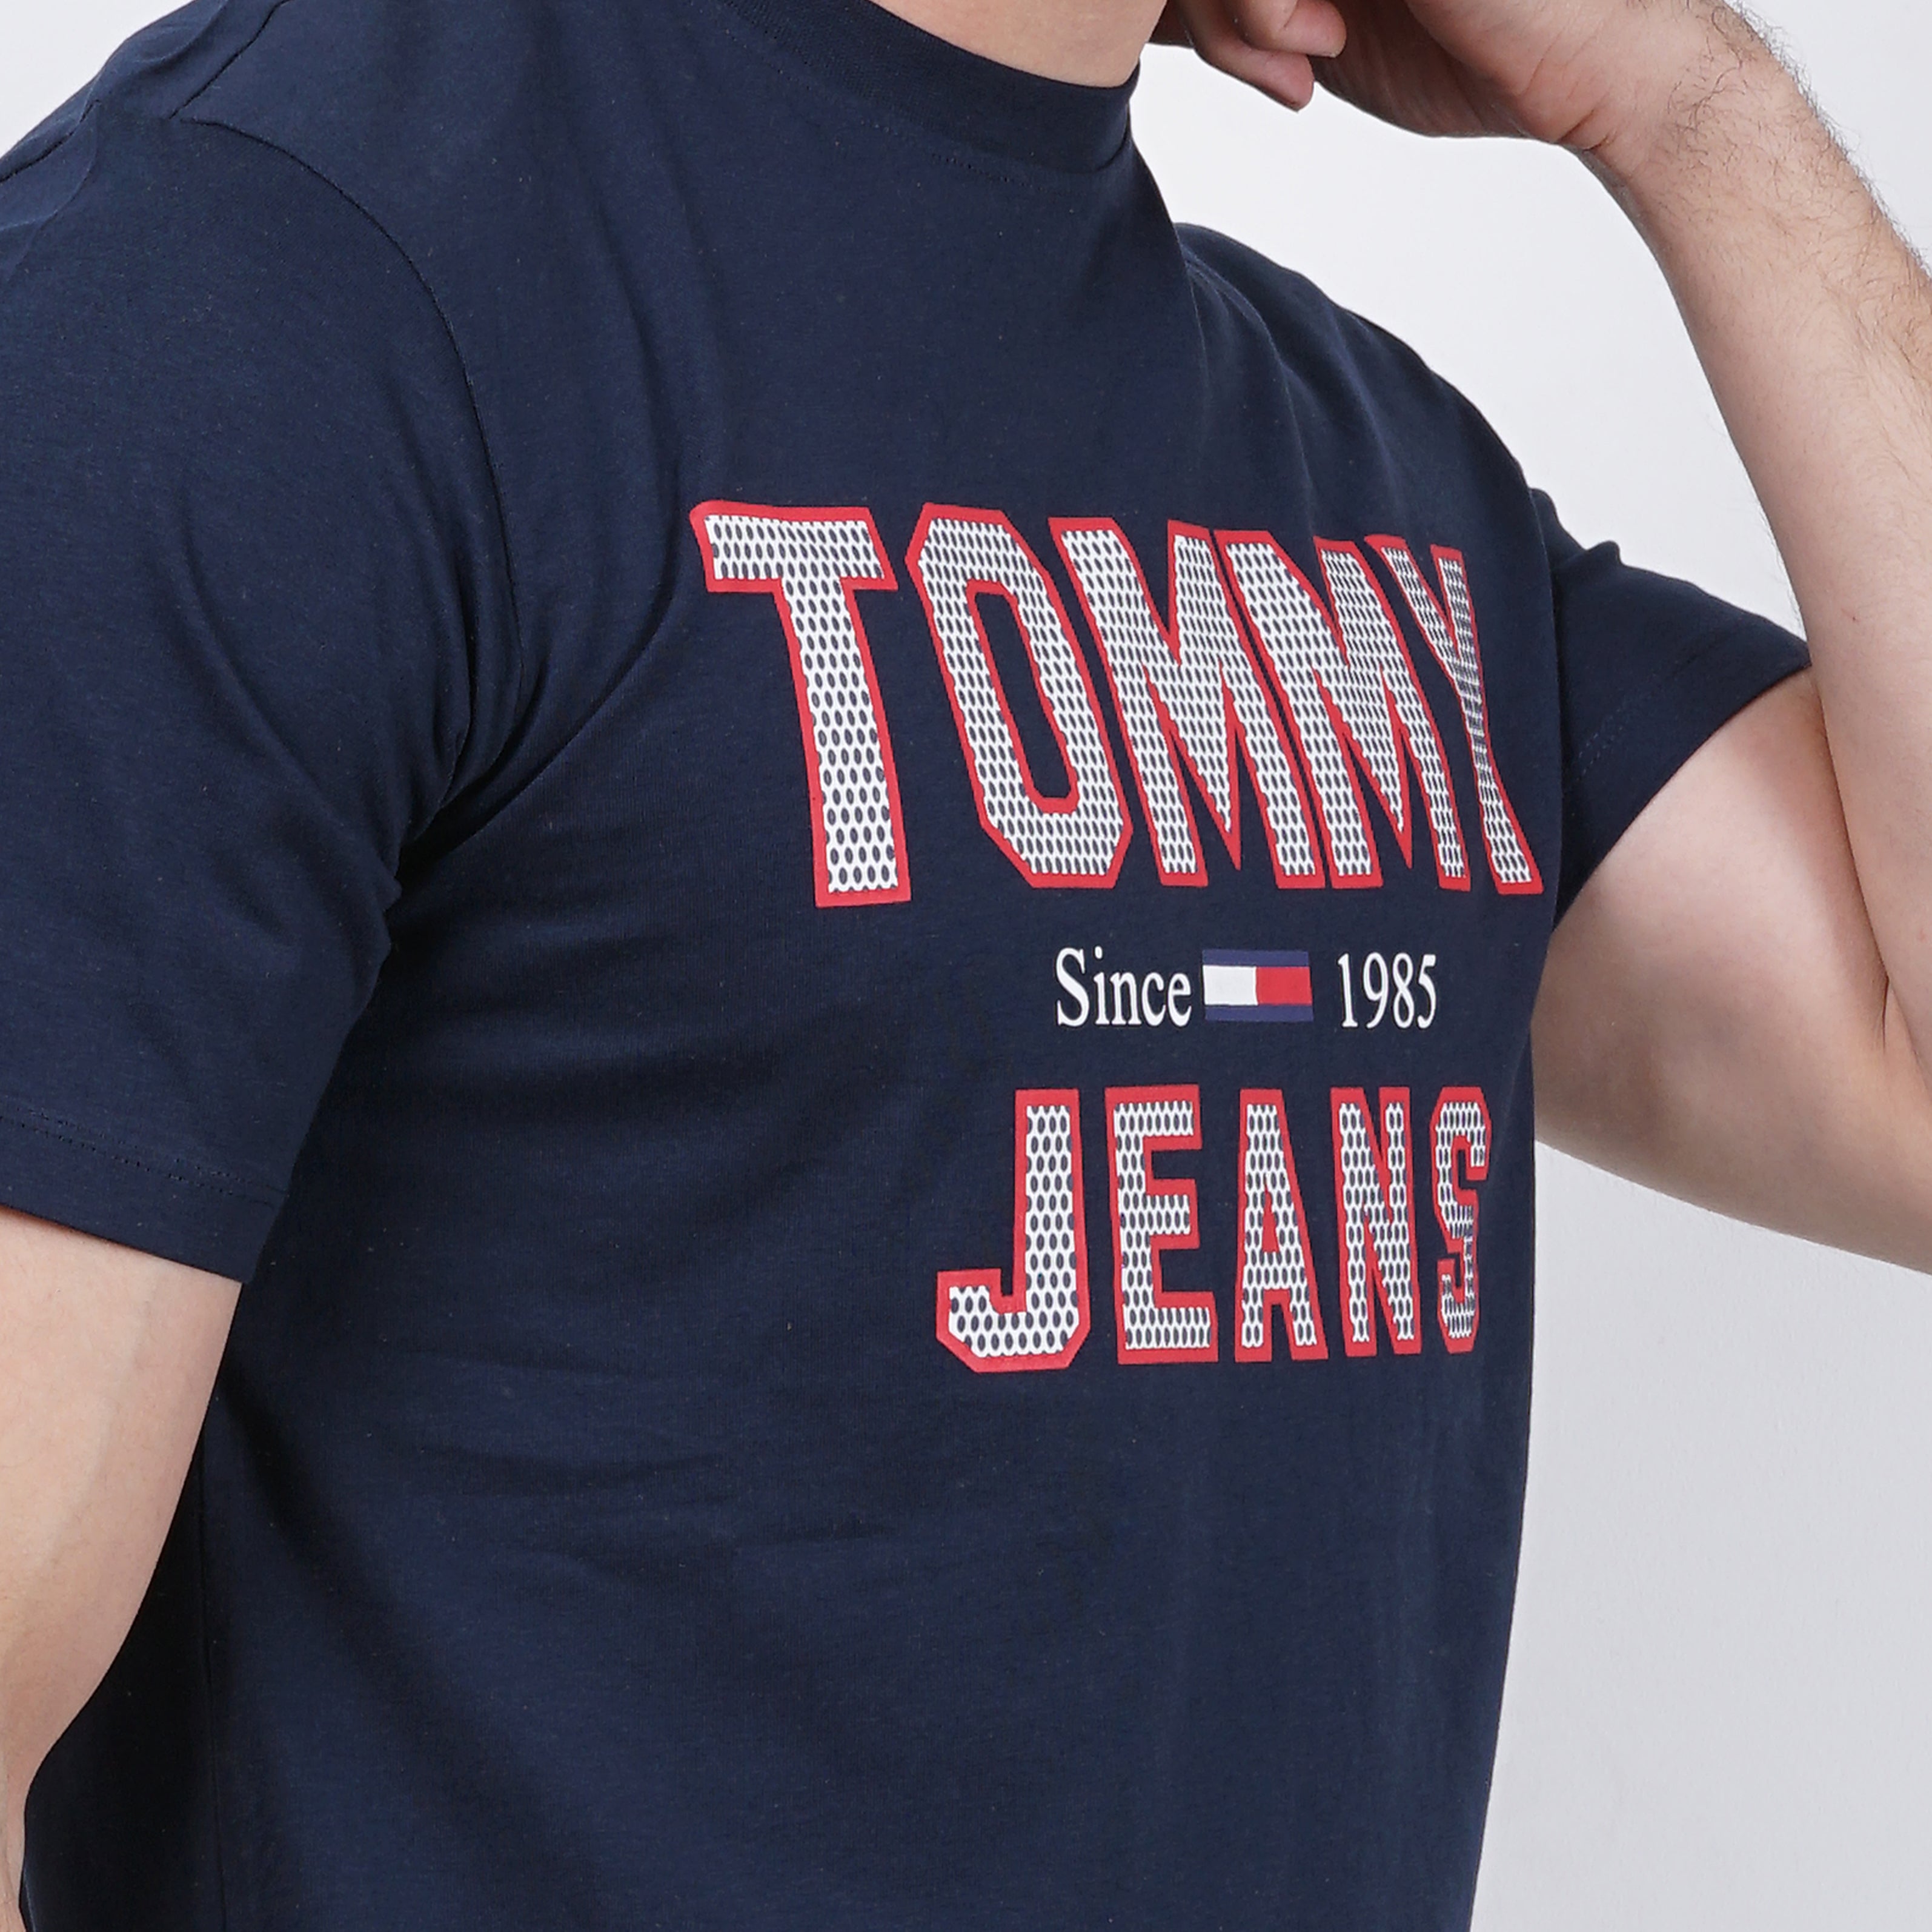 Tommy Jeans Rubber Printed - Marca Deals - Tommy Hilfiger